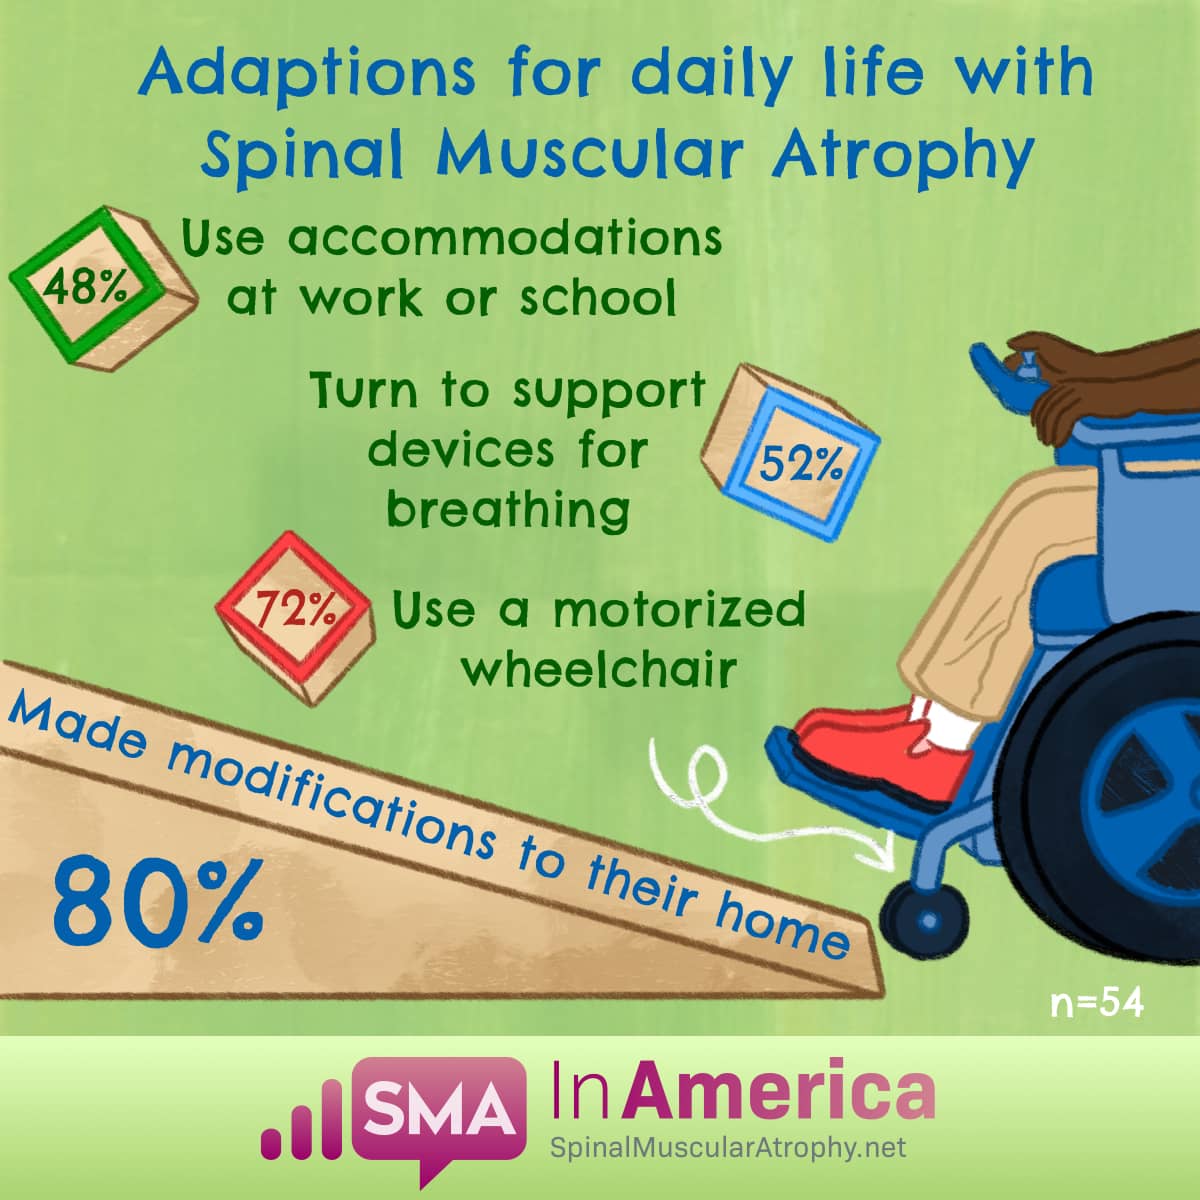 SMA survey respondents: 48% need accommodations at work or school, 52% need support devices for breathing, 72% use motorized wheelchair, 80% made modifications to homes.